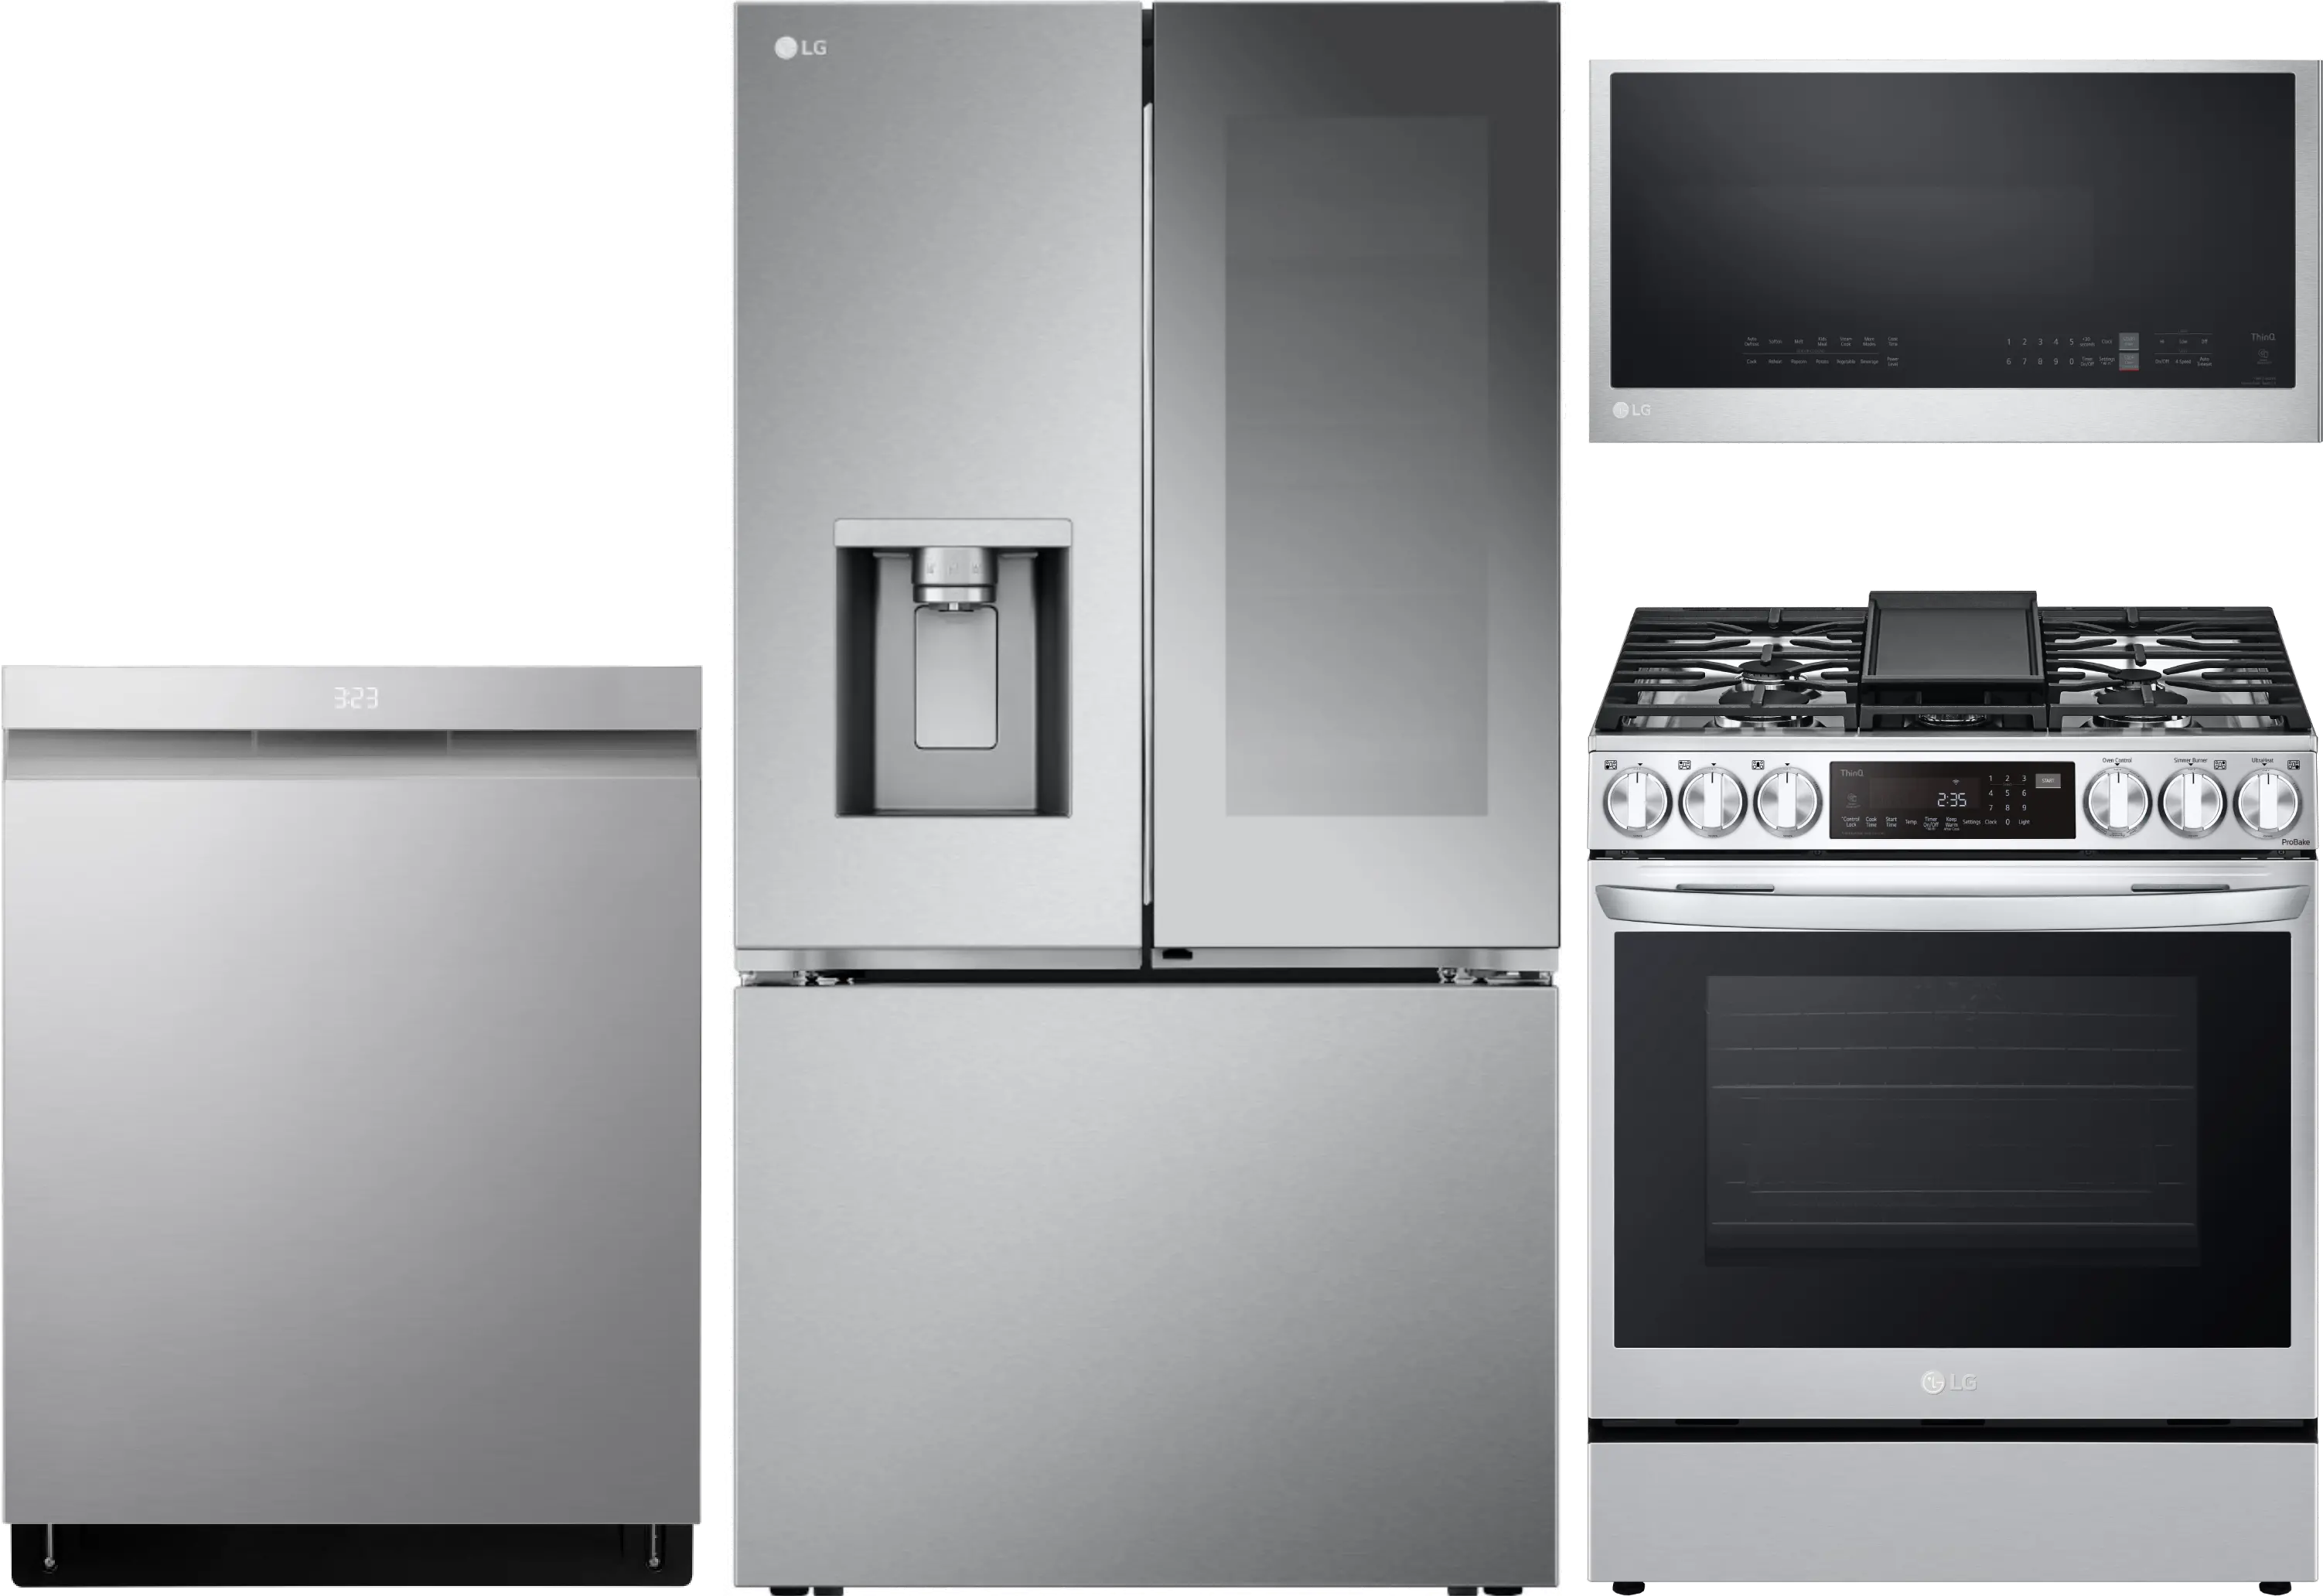 https://static.rcwilley.com/products/113387164/LG-4-Piece-Gas-Appliance-Package---Stainless-Steel-rcwilley-image1.webp